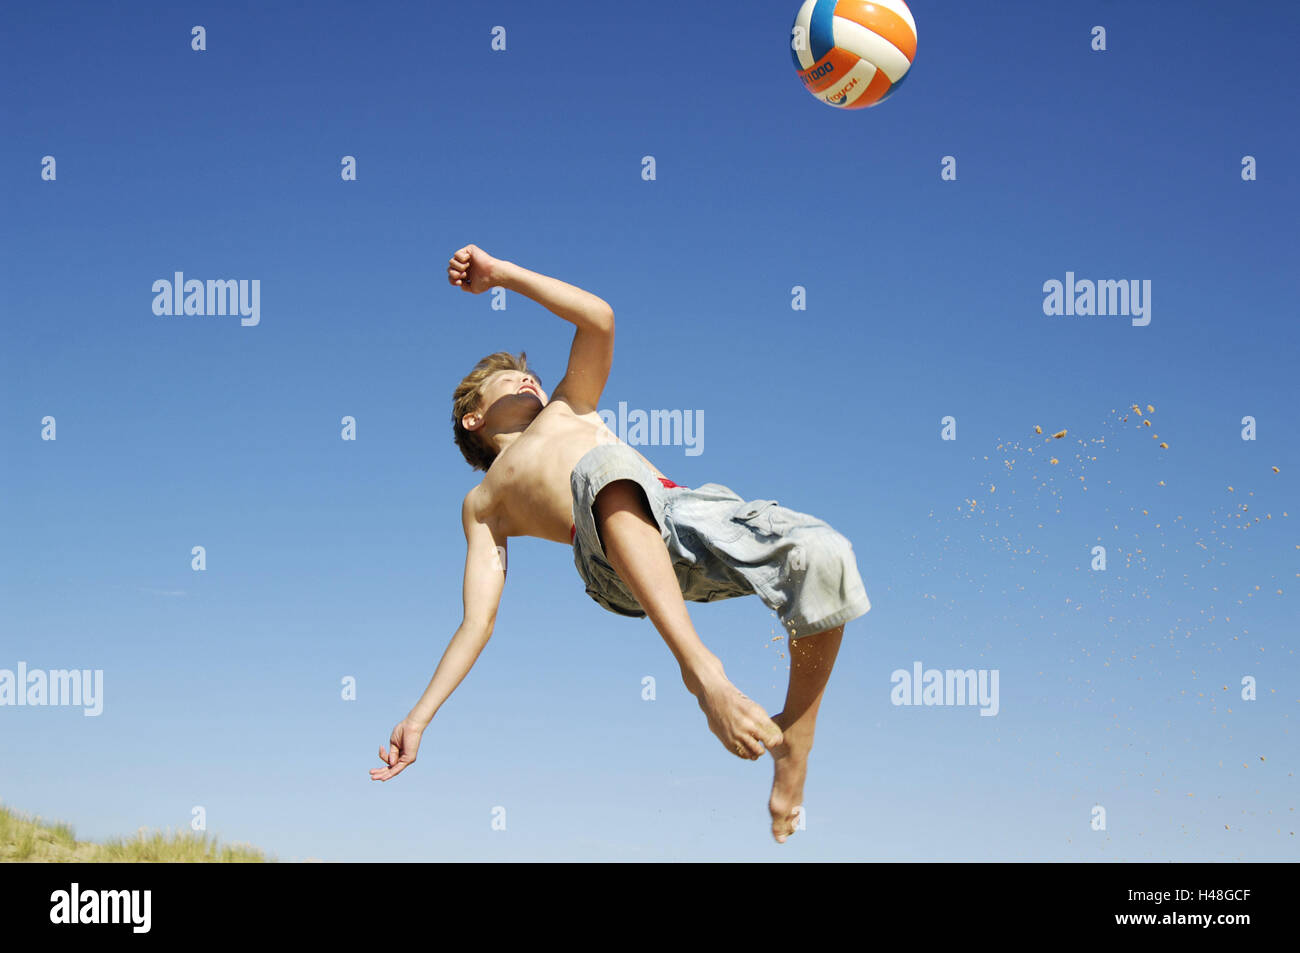 Boy, beach, to ball games, crack, summers, the sun, holidays, leisure time, vacation, child, fun, game, activity, motion, actively, hobby, football, overhead kick, jump, jump up, sport, ball, to football matches, Sand, Stock Photo